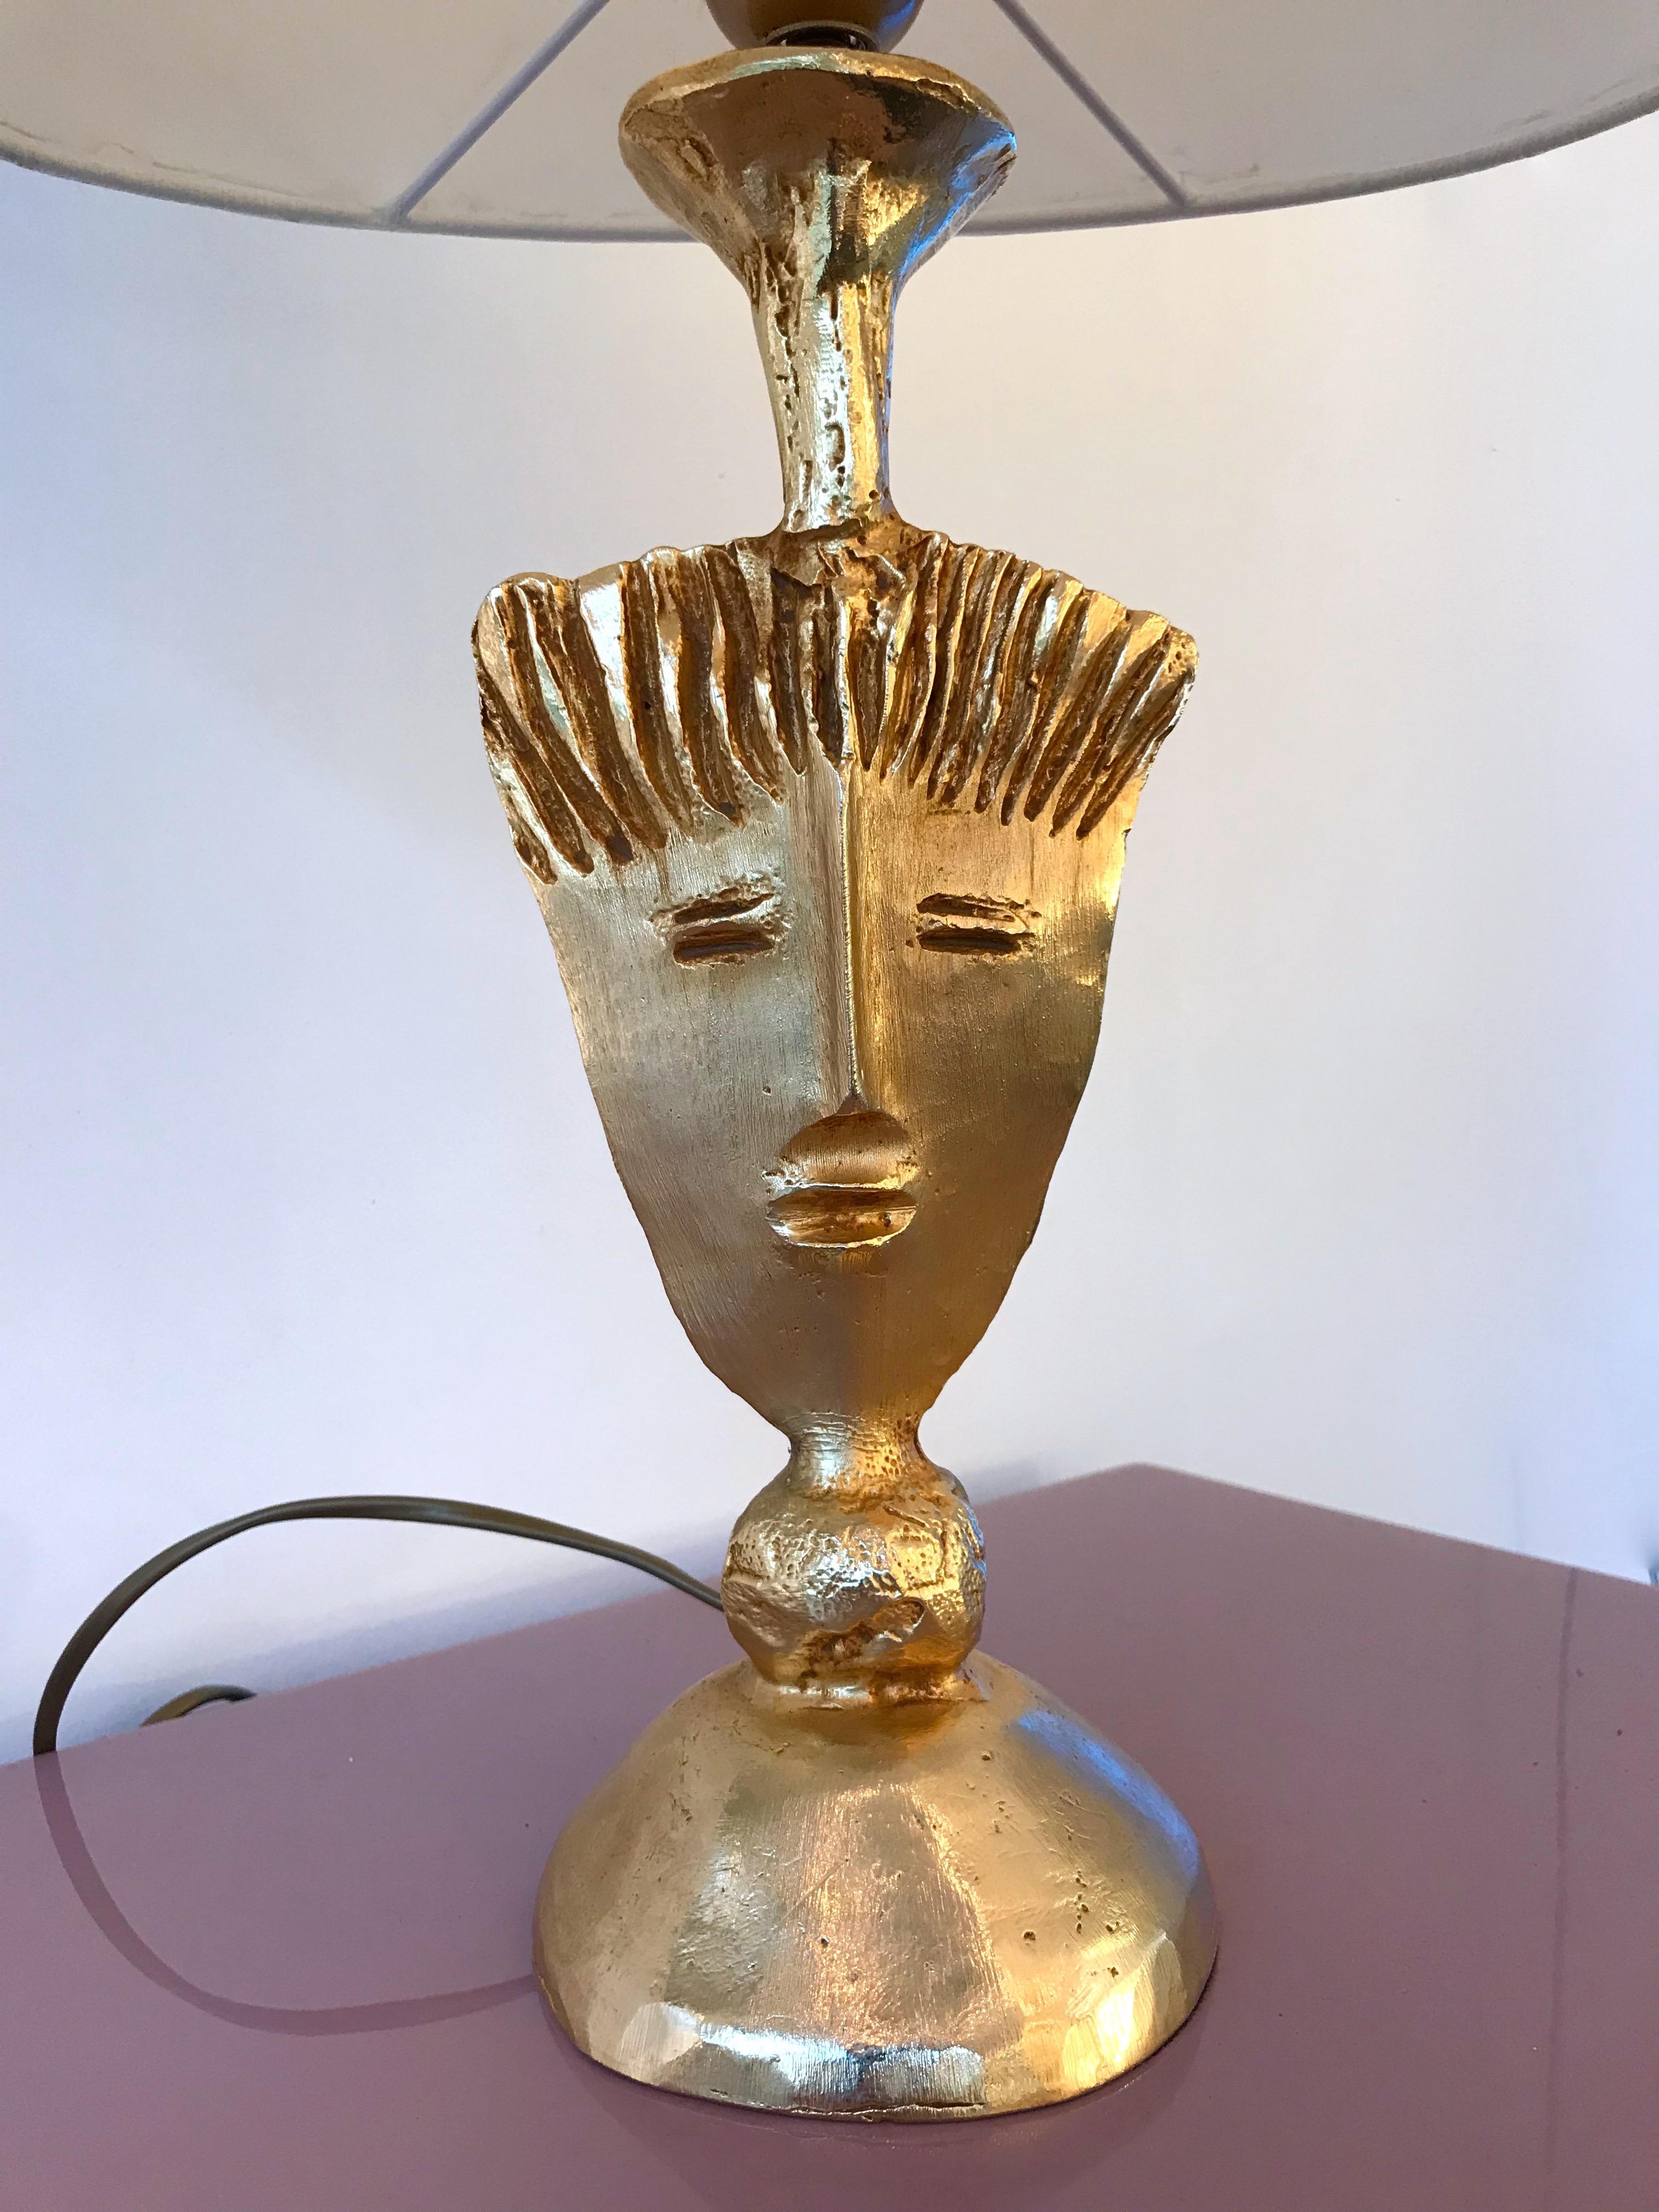 Rare model of table or bedside lamps by the artist Pierre Casenove for the foundry Fondica in Gisors, France. Gilt bronze metal. No more production today. Height top of sculpture 34cms. Note: Demonstration shades not included. Famous artist who have